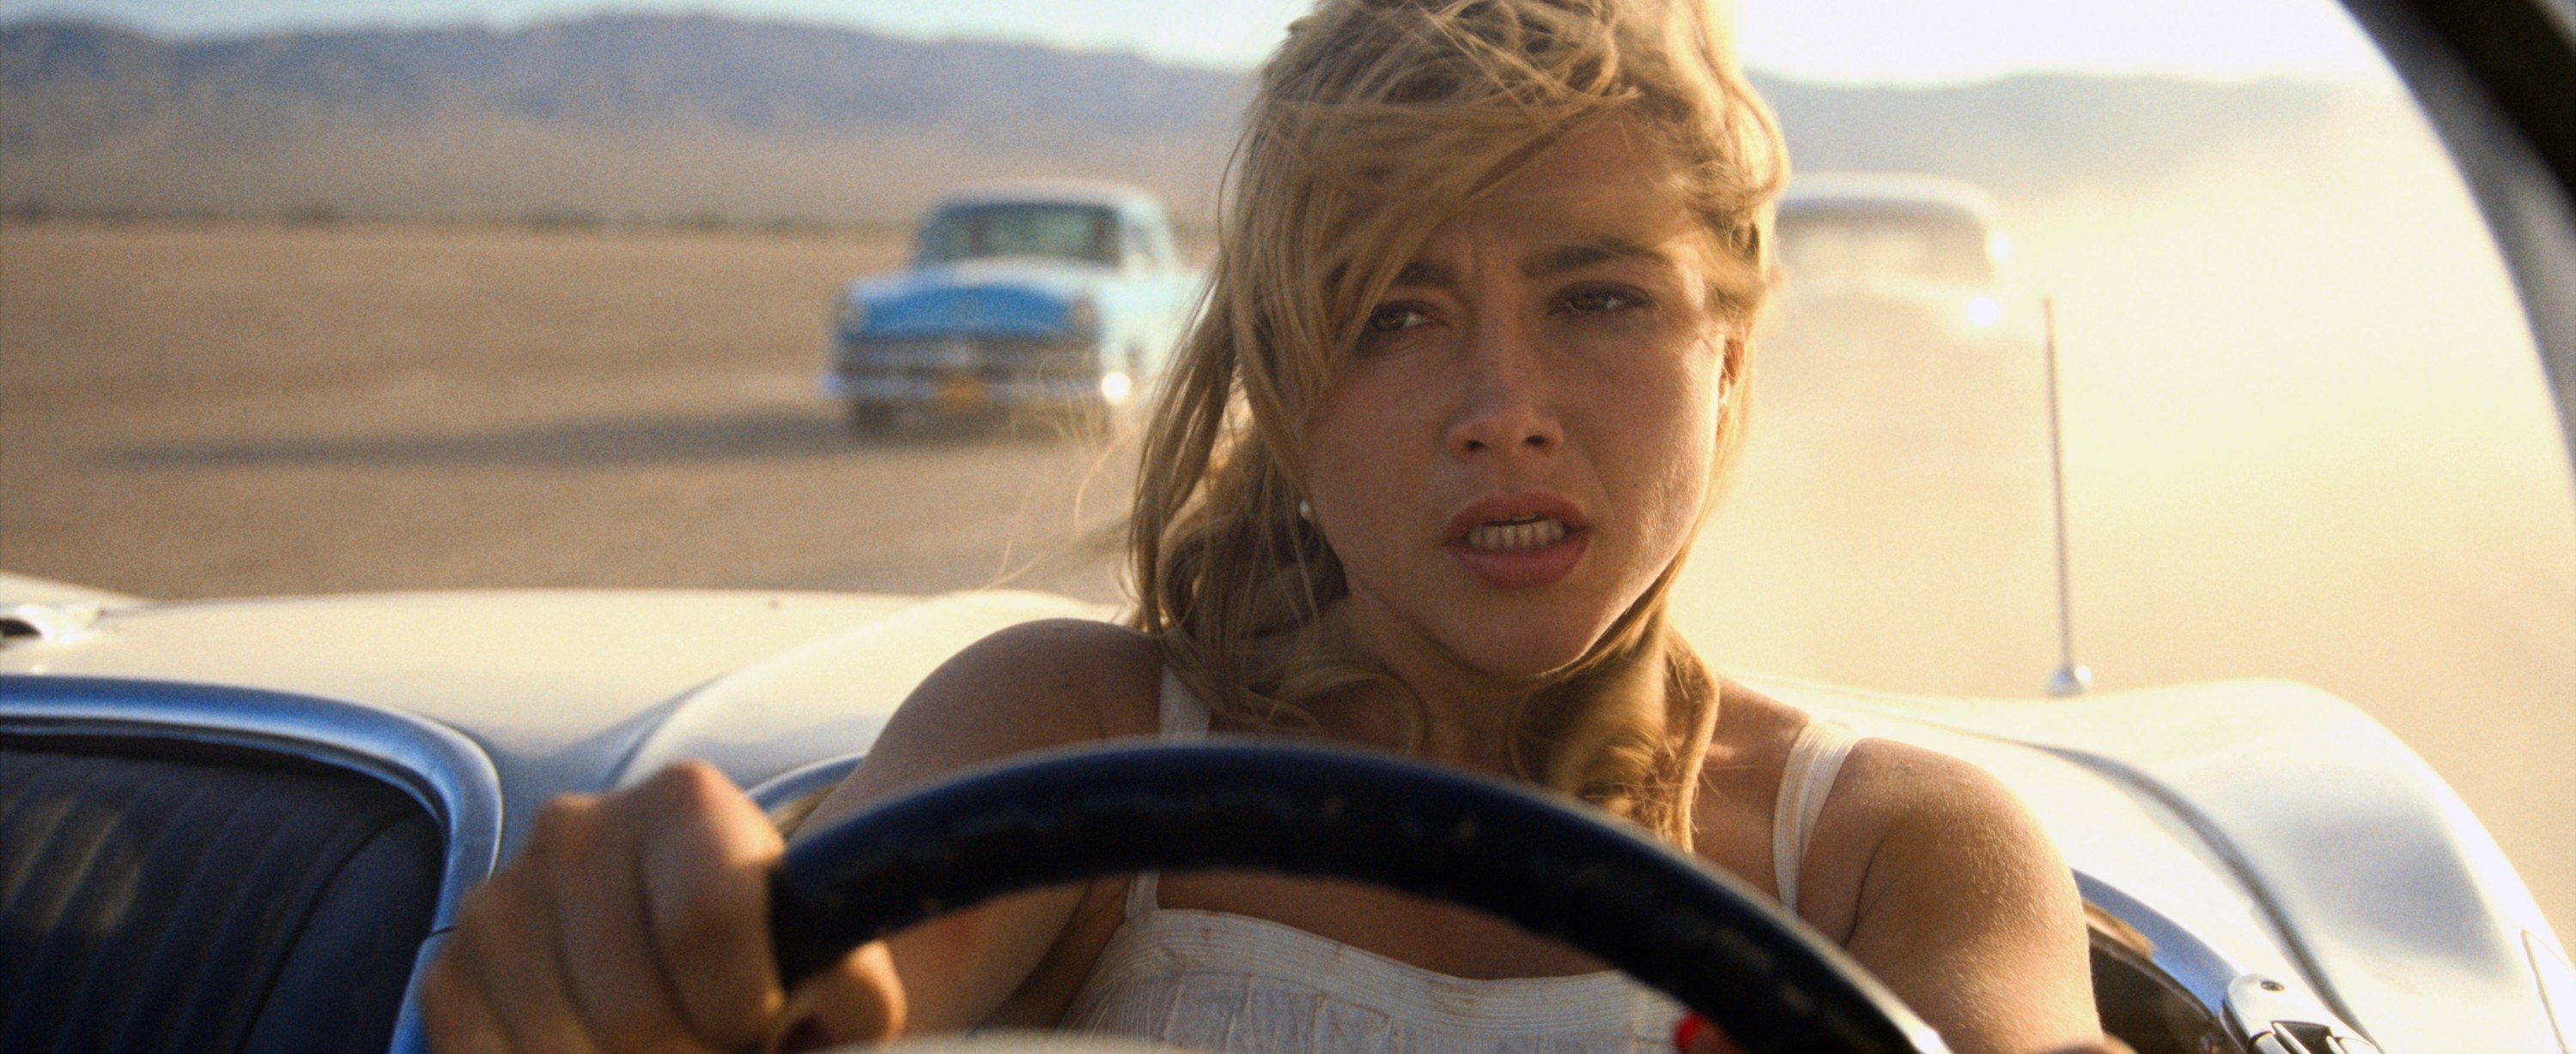 Florence Pugh driving and looking stressed with two cars behind her in a scene from the film